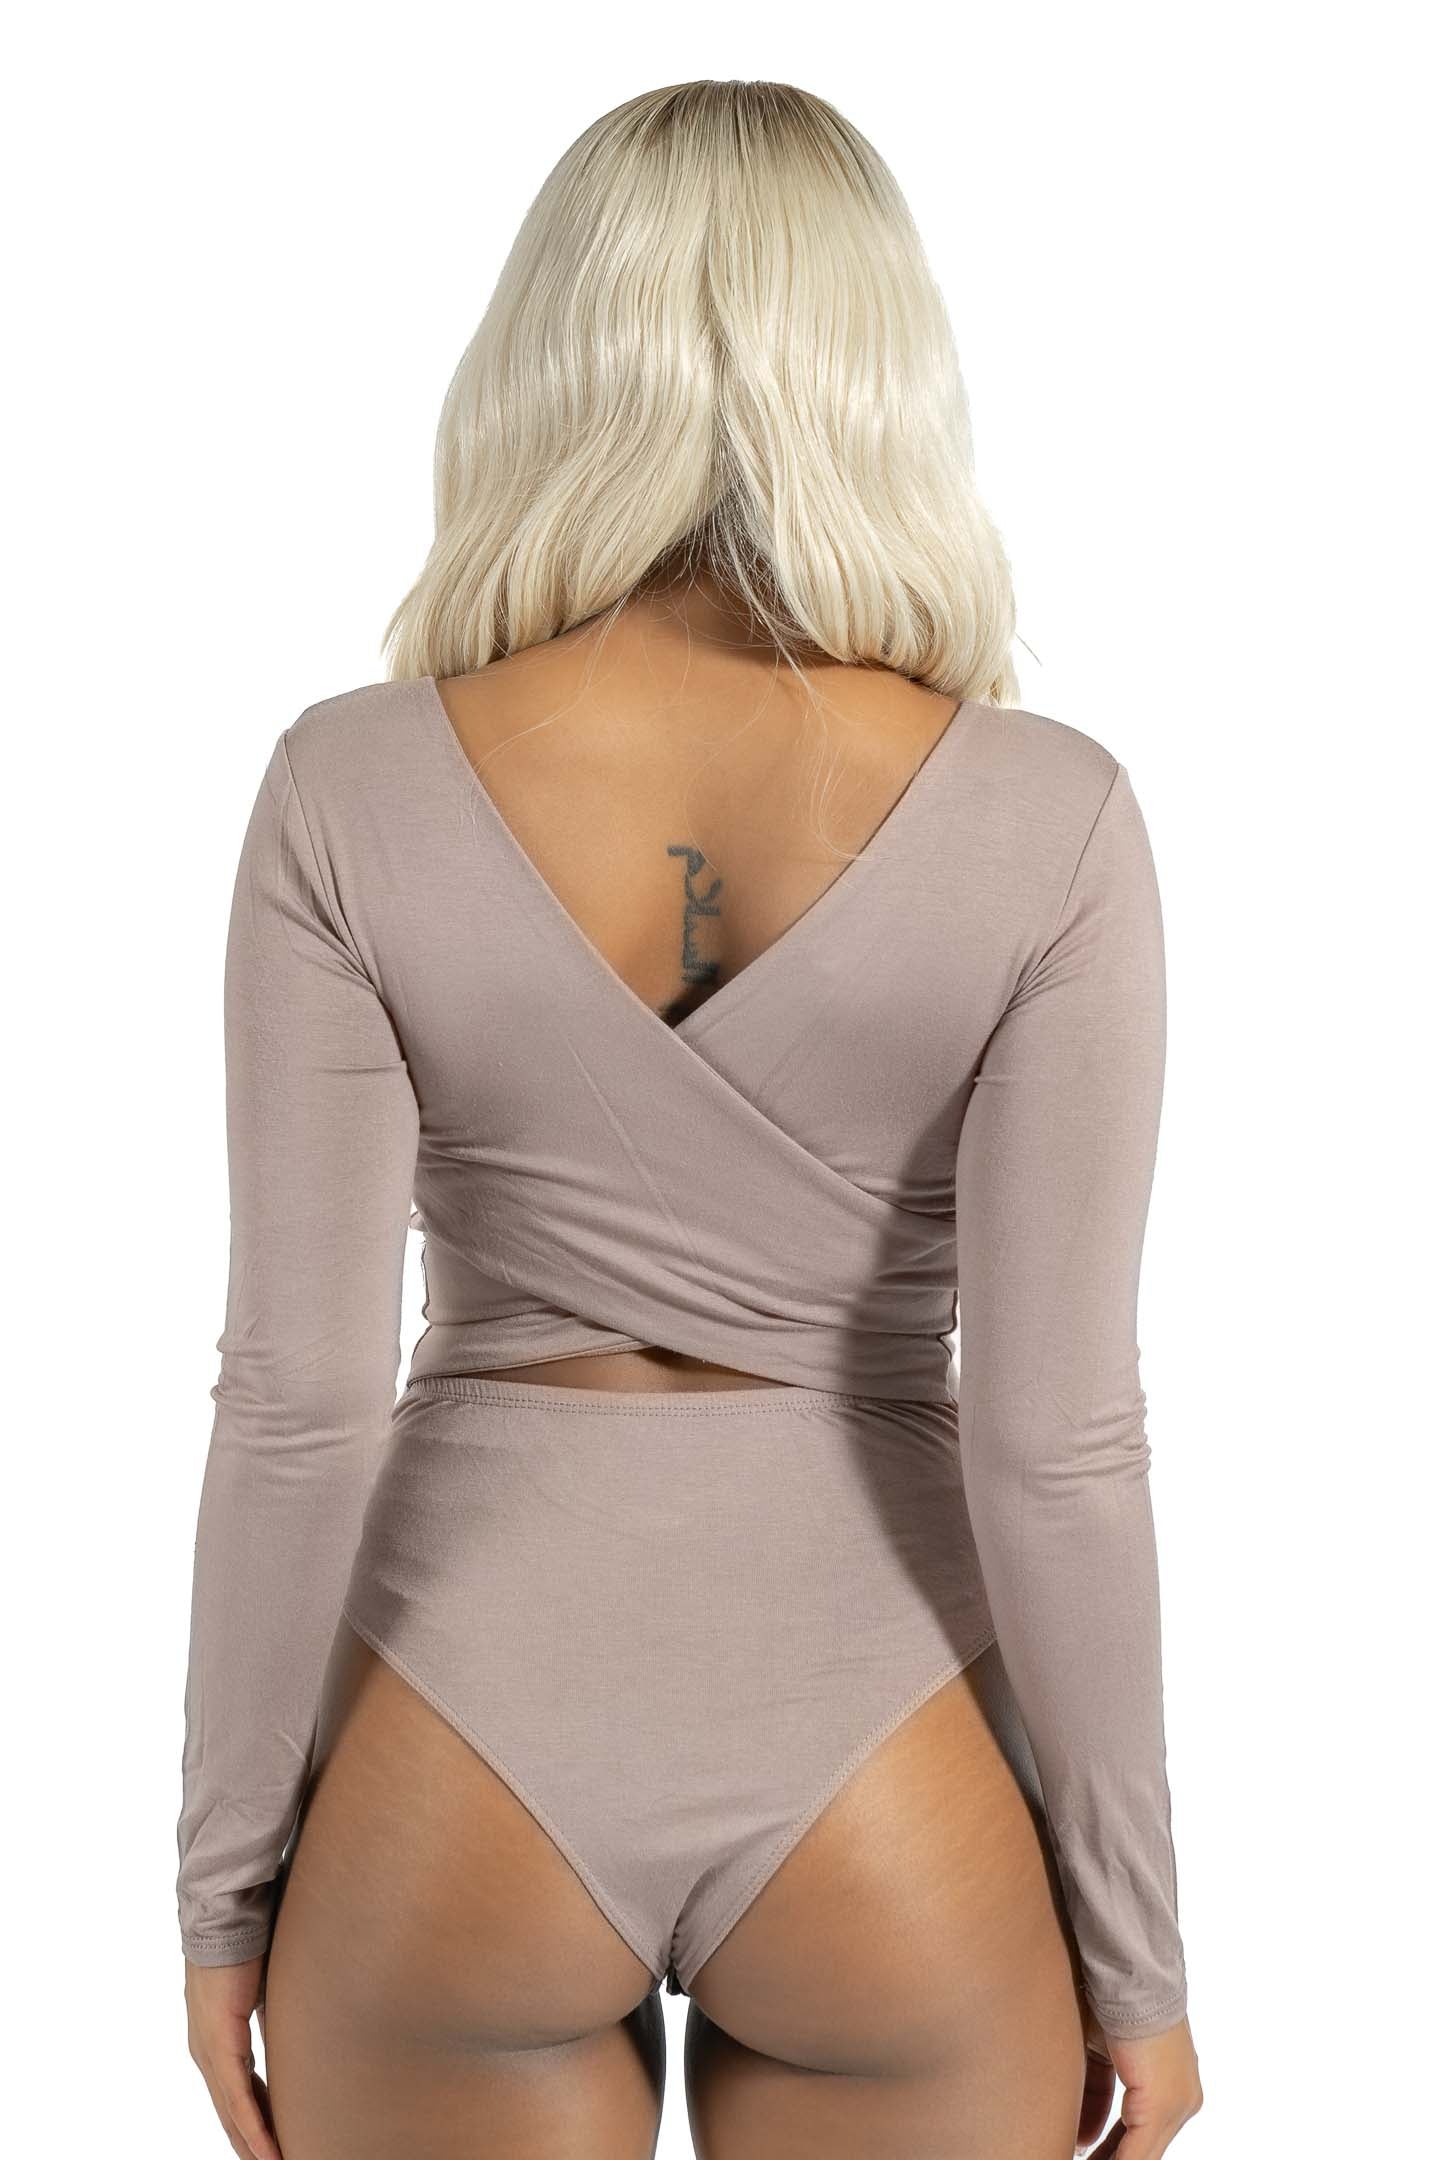 Taupe Body Suit